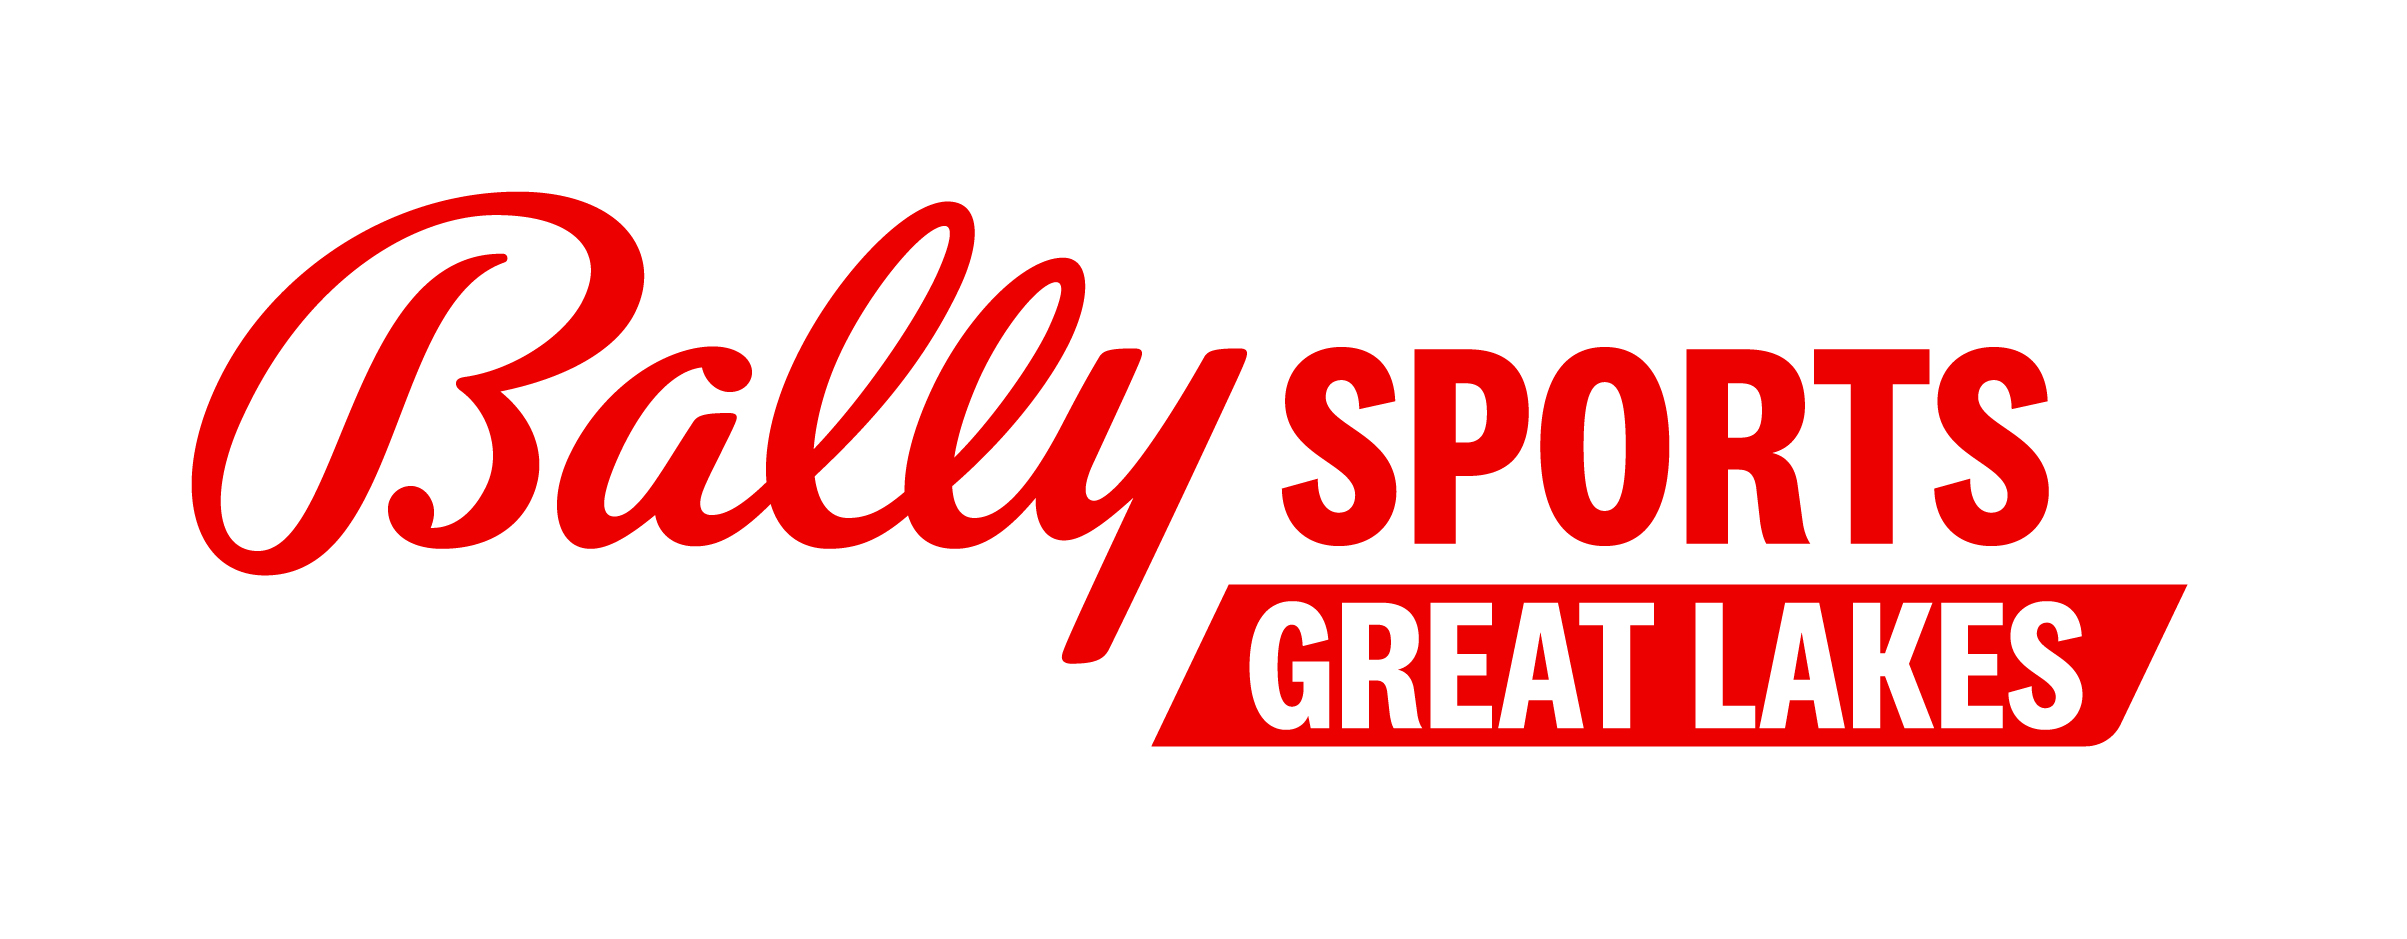 SportsTime Ohio is now Bally Sports Great Lakes What it means and how to stream Cleveland Indians games in 2021